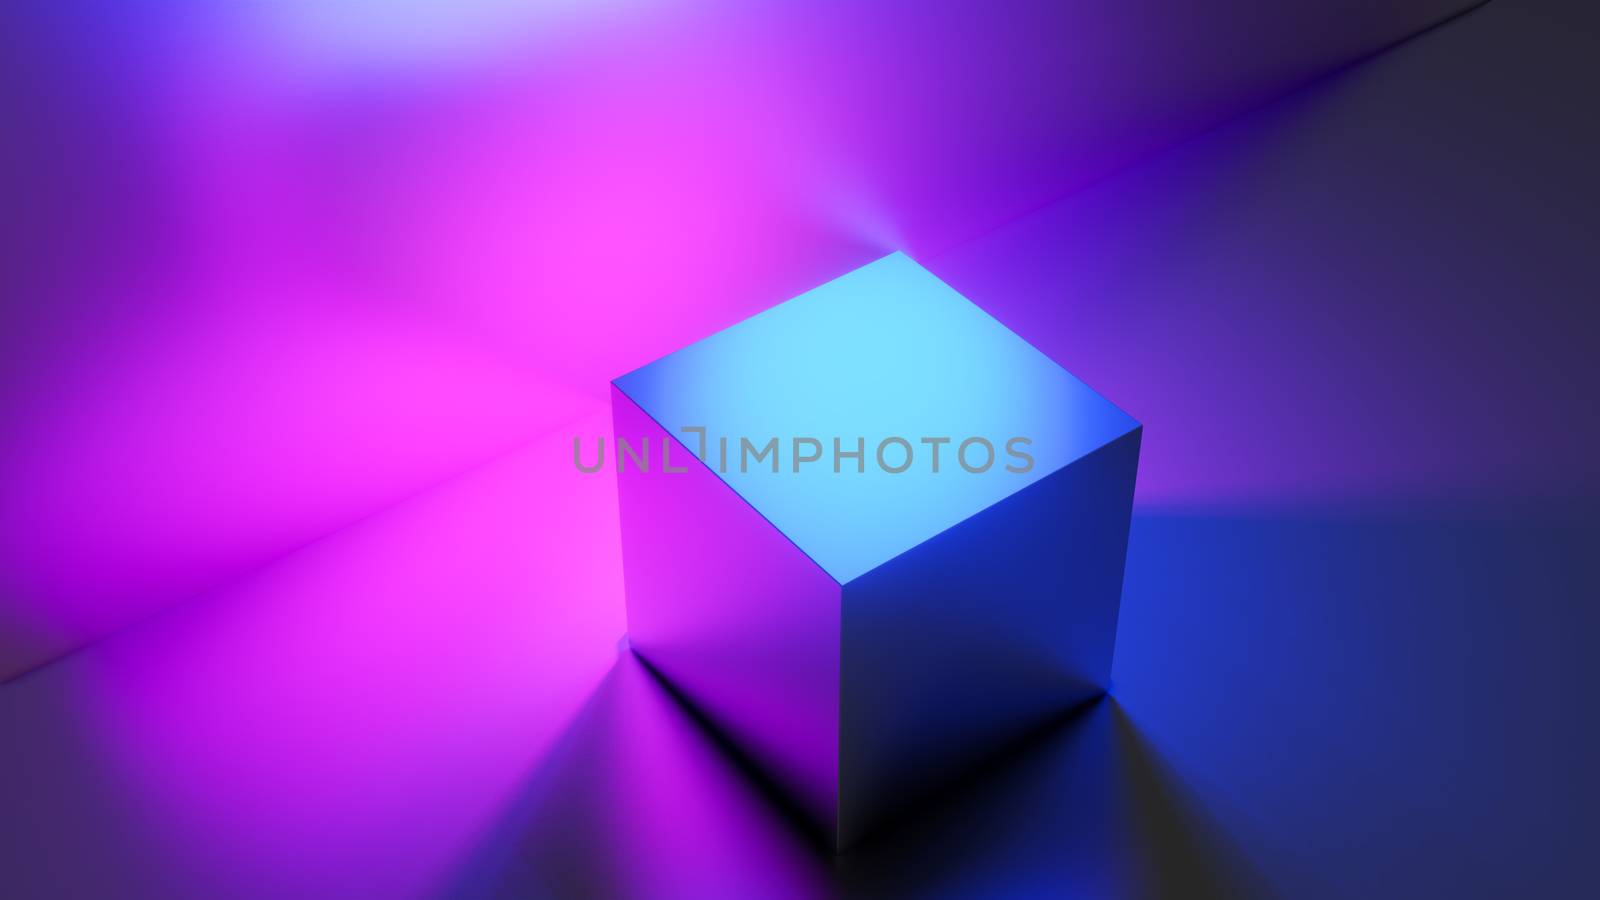 Product display stand for display of content design. Abstract fashion background, ultraviolet neon lights, pink blue vibrant colors, laser show. Banner for advertise product. 3D illustration